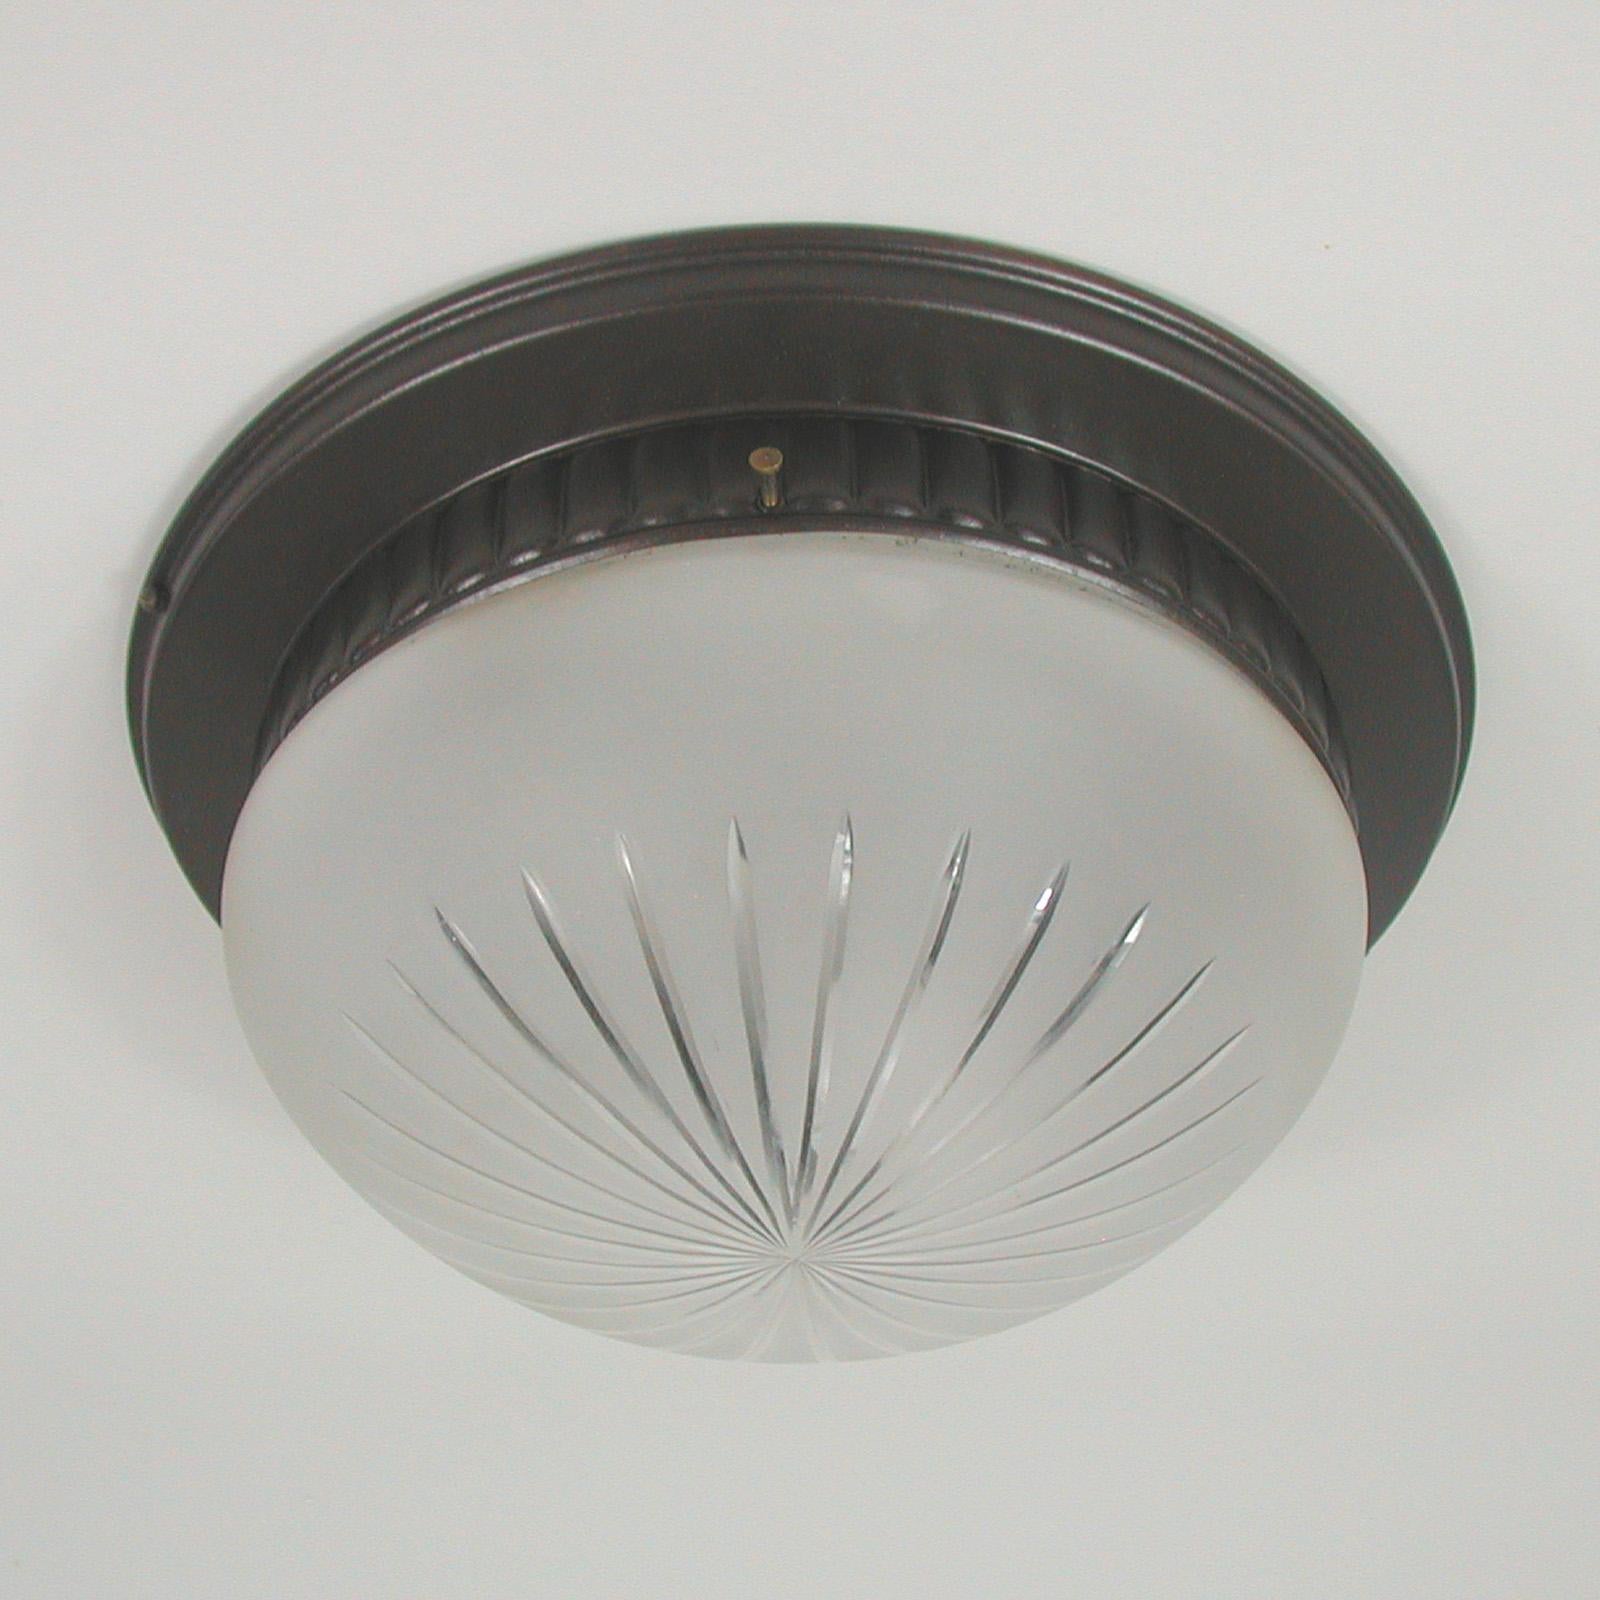 Art Deco Bronzed Metal and Satin Glass Flush Mount, Austria, 1910 to 1920 For Sale 1